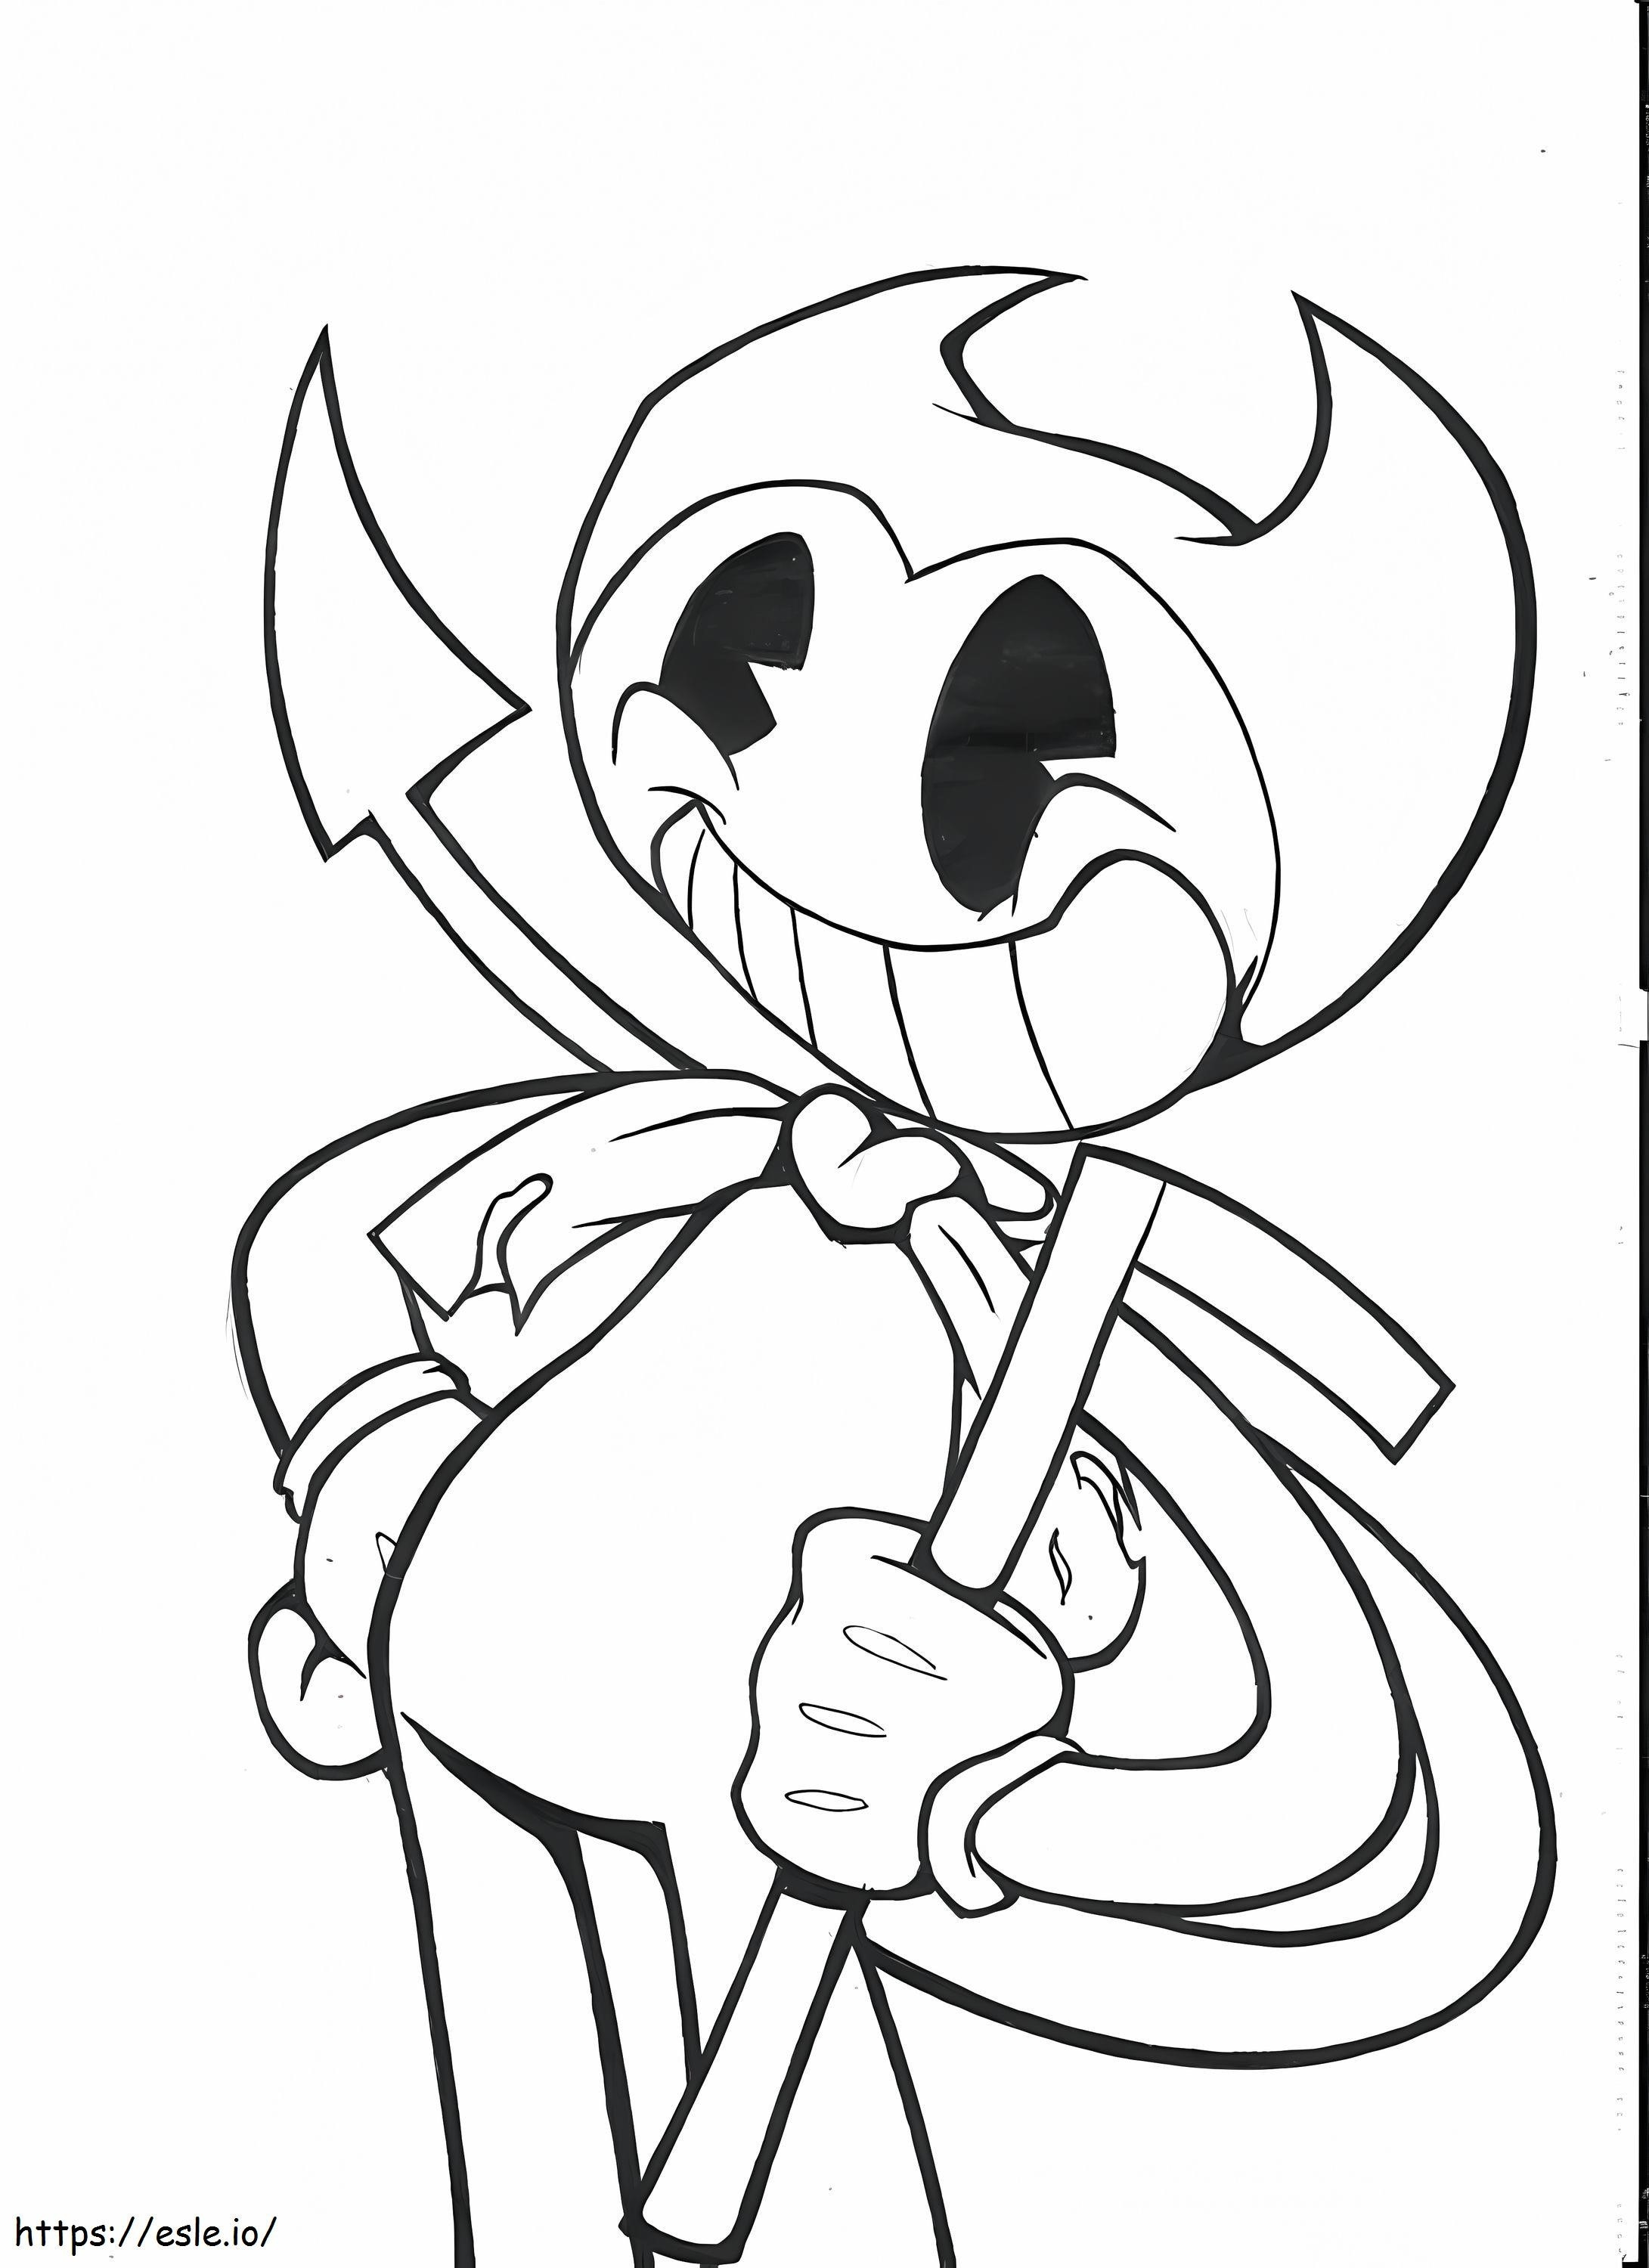 Bendy 8 coloring page